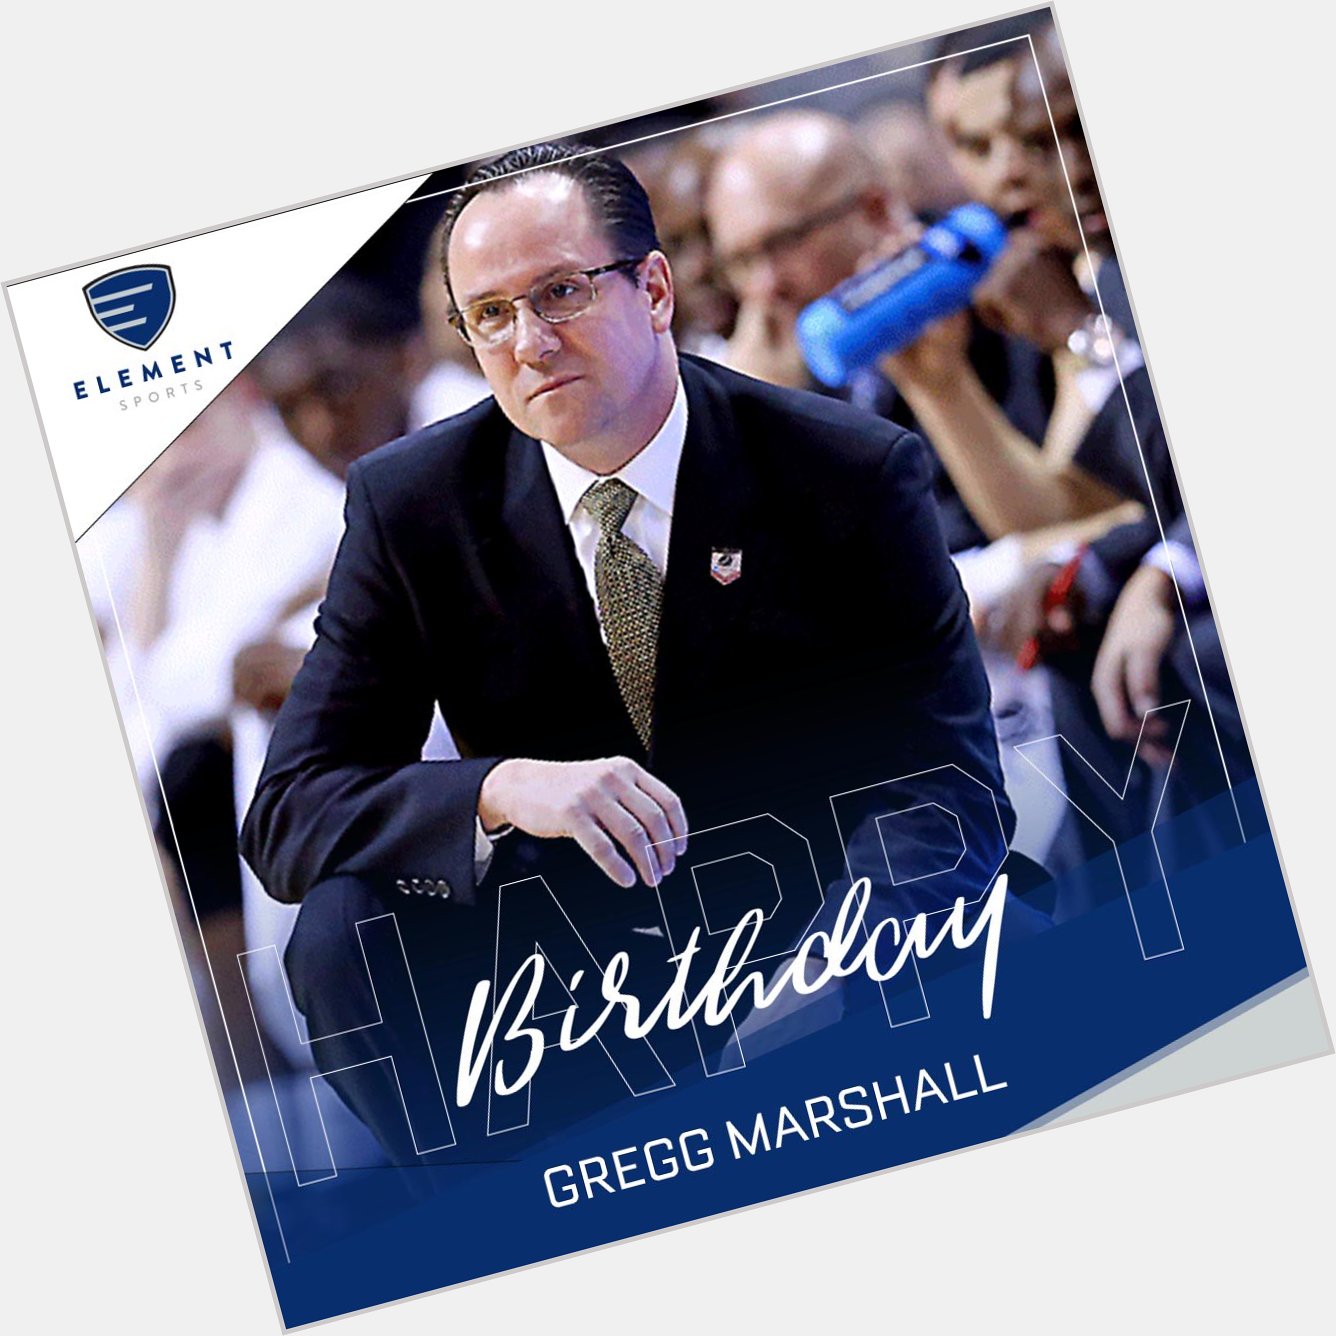 Wishing a very happy birthday to one of the best coaches in the game, Coach Gregg Marshall  